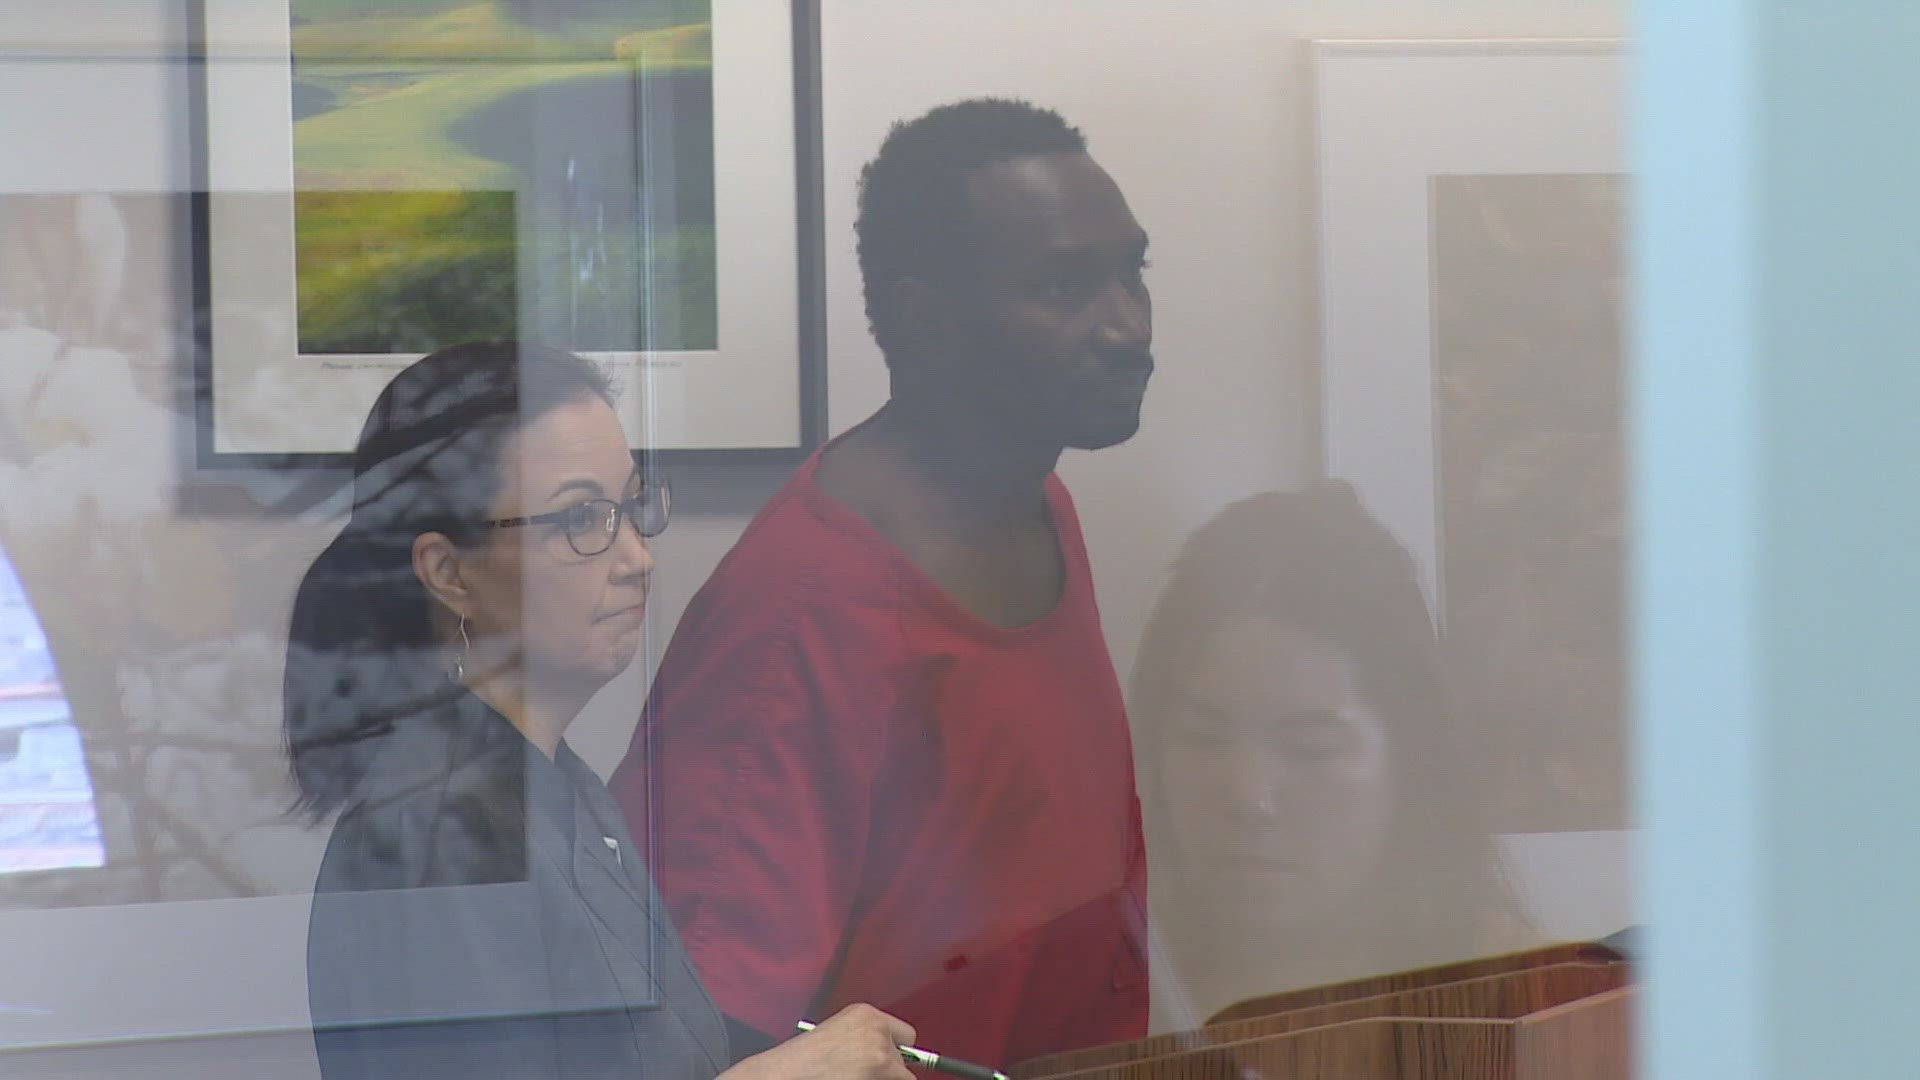 Sana Ceesay entered a not-guilty plea Thursday and will remain in King County Jail on $2 million bail.